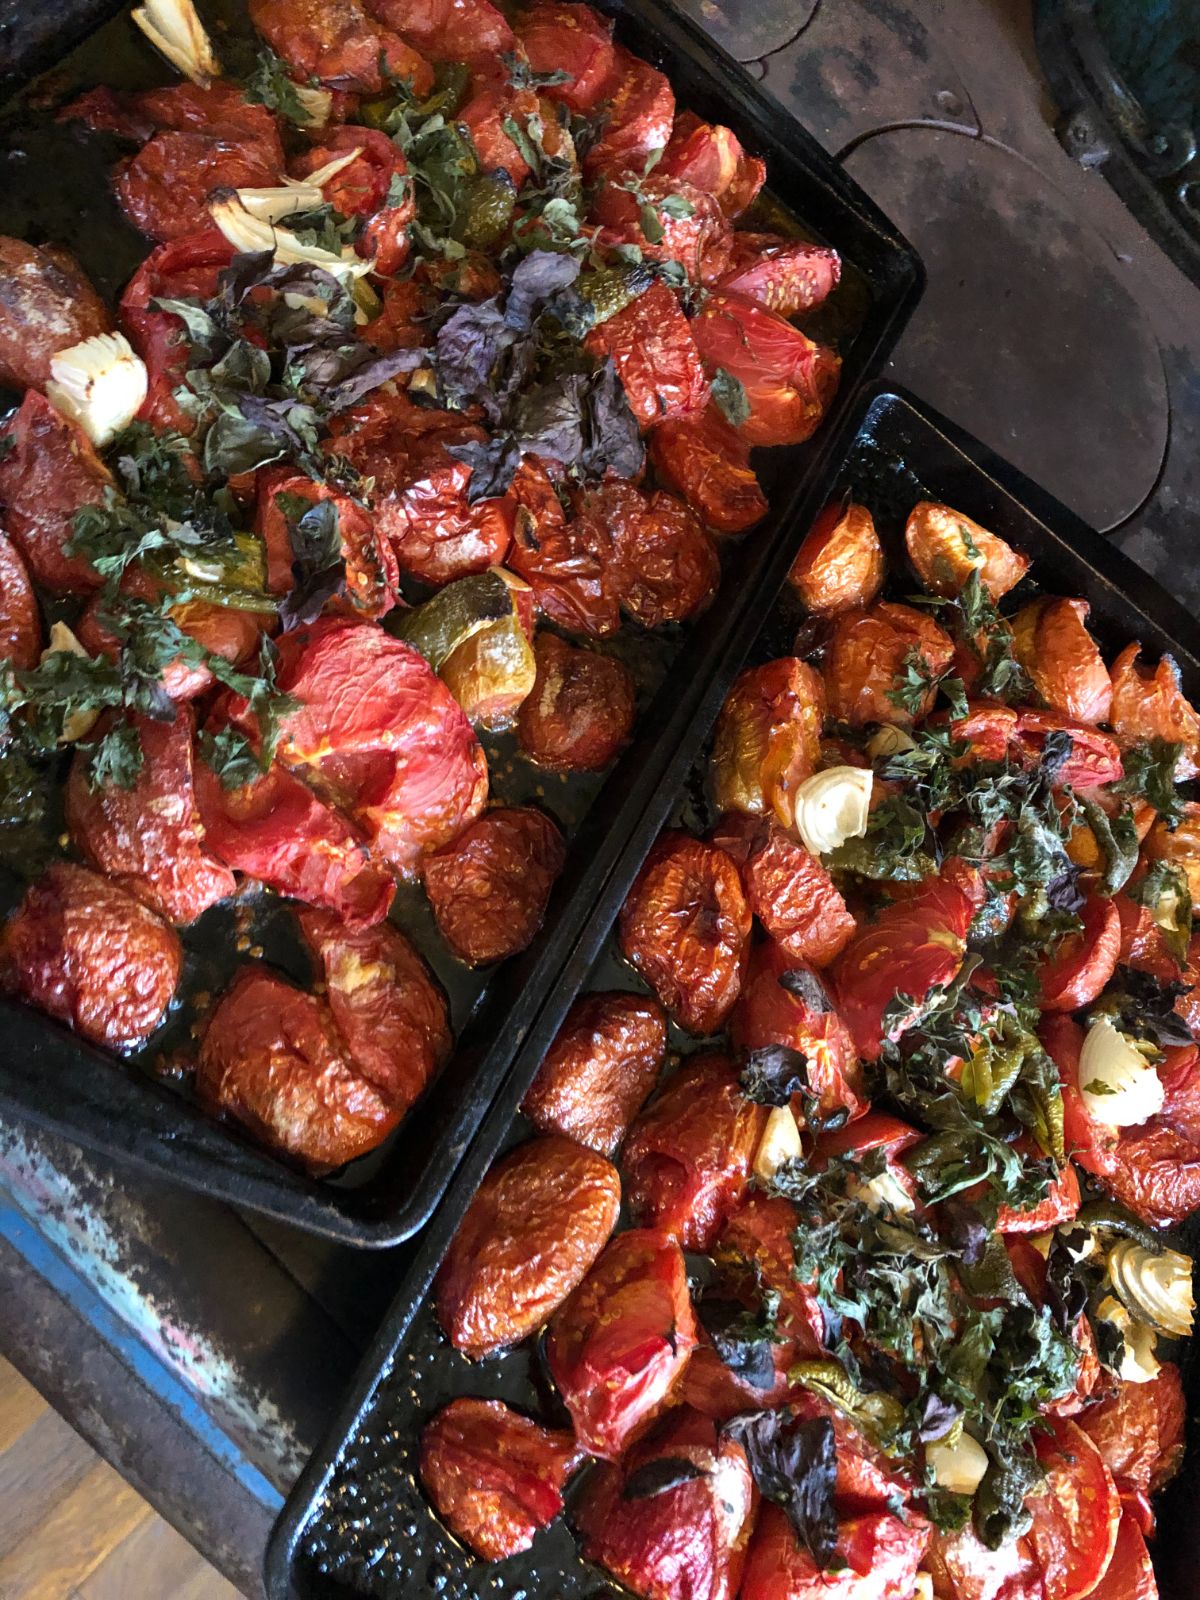 Pans of roasted tomatoes for sauce